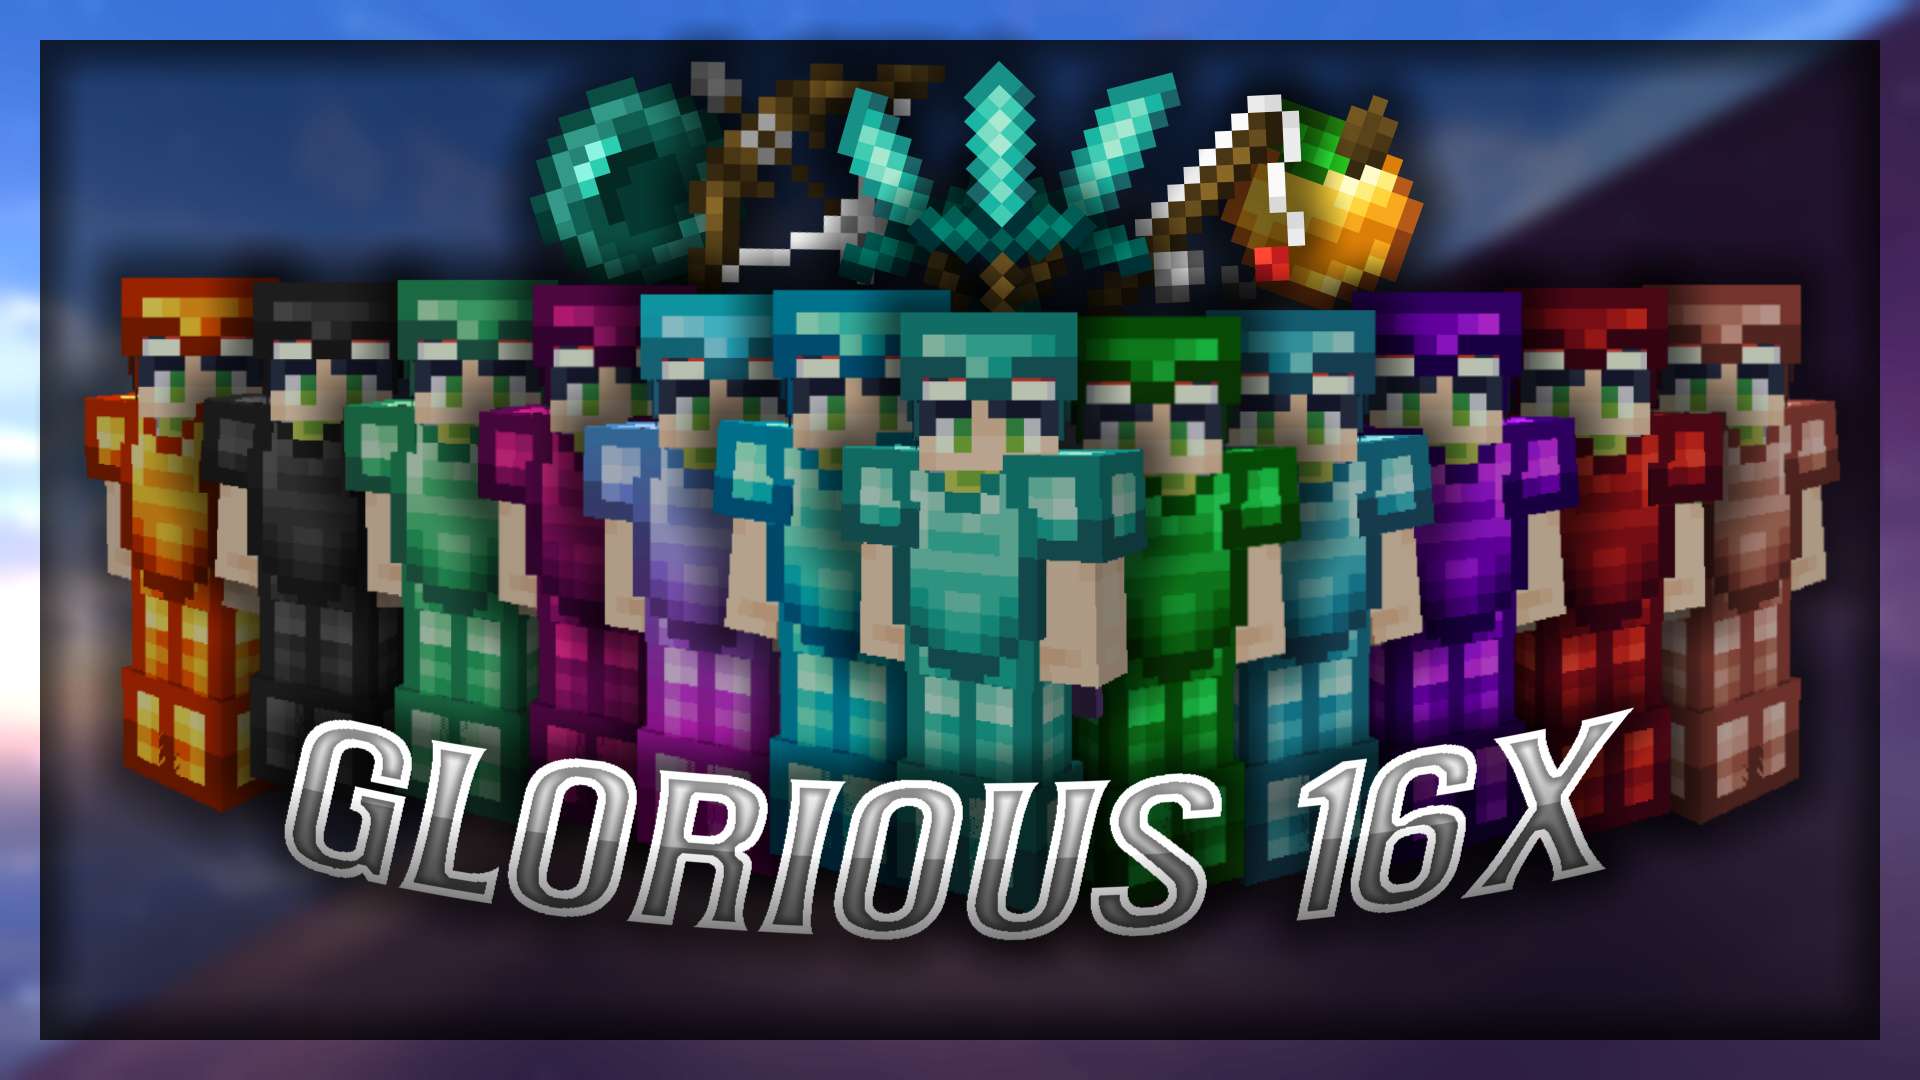 (open zip with WinRAR) Glorious - Marine 16 by Mek on PvPRP